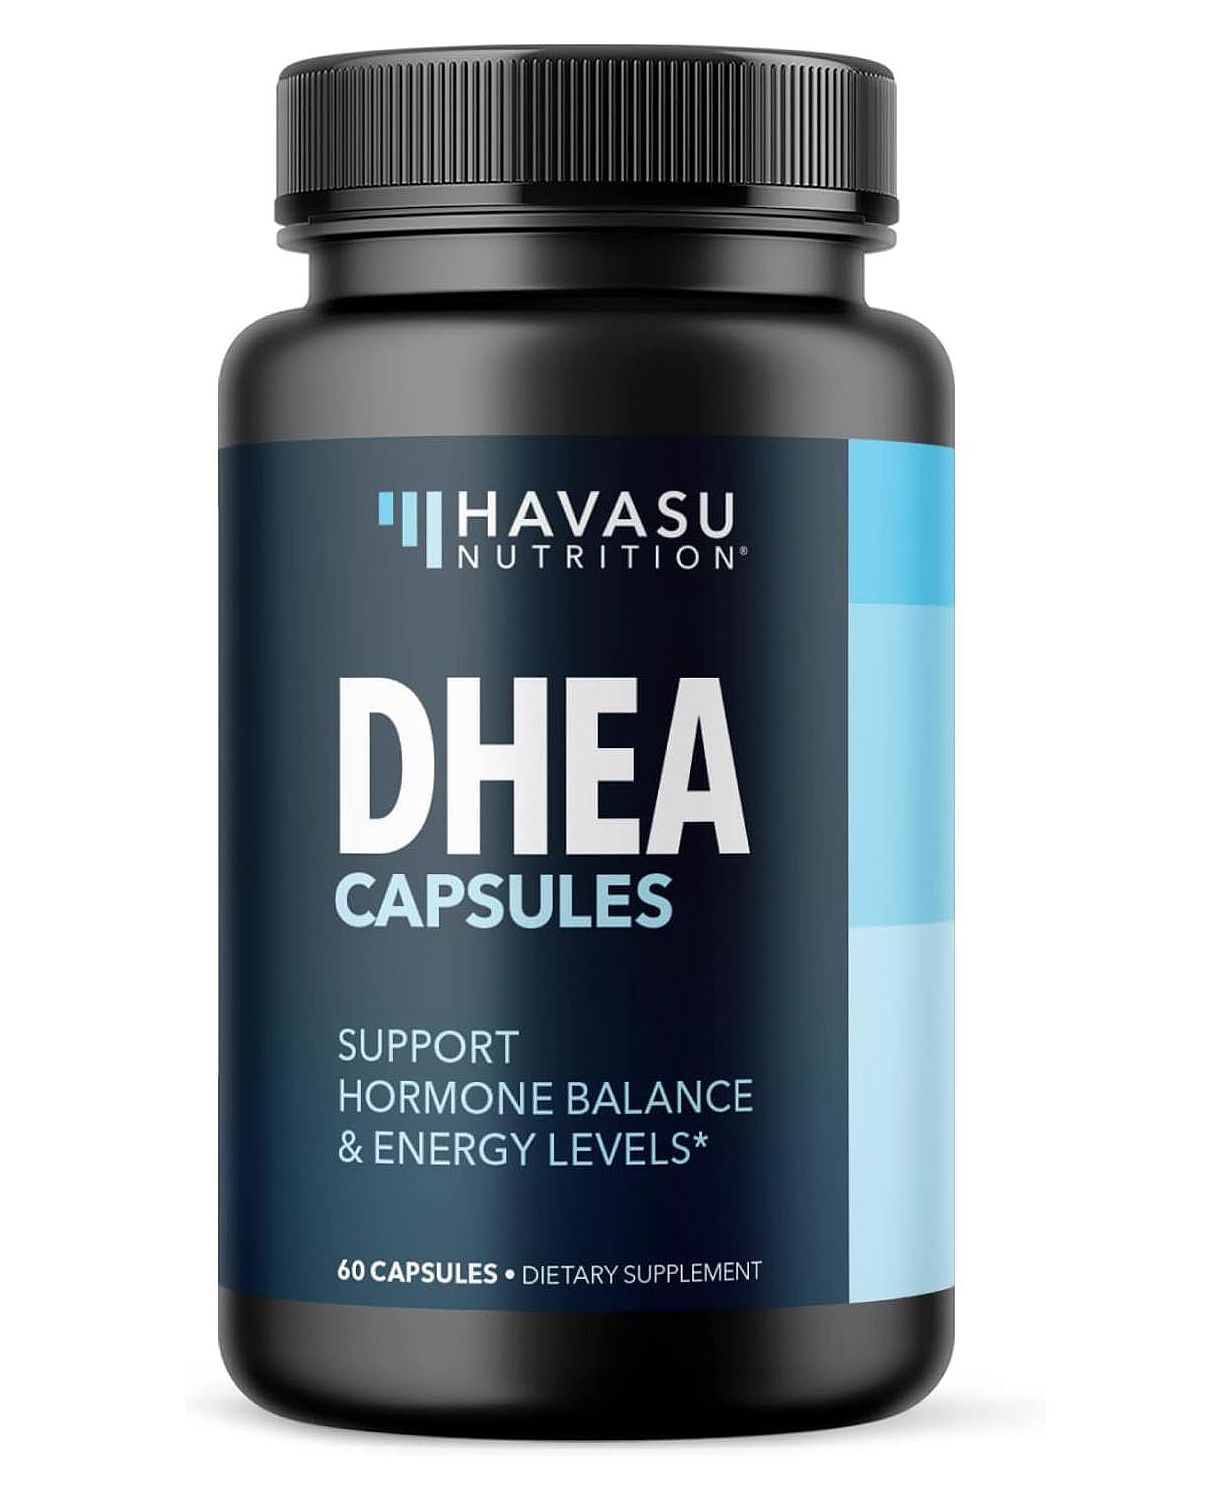 DHEA 50mg Extra Strength Designed for Promoting Youthful Energy, Balance Hormone Levels & Supports Lean Muscle Mass | Non-GMO, Supplement for Men & Women | 60 Capsules